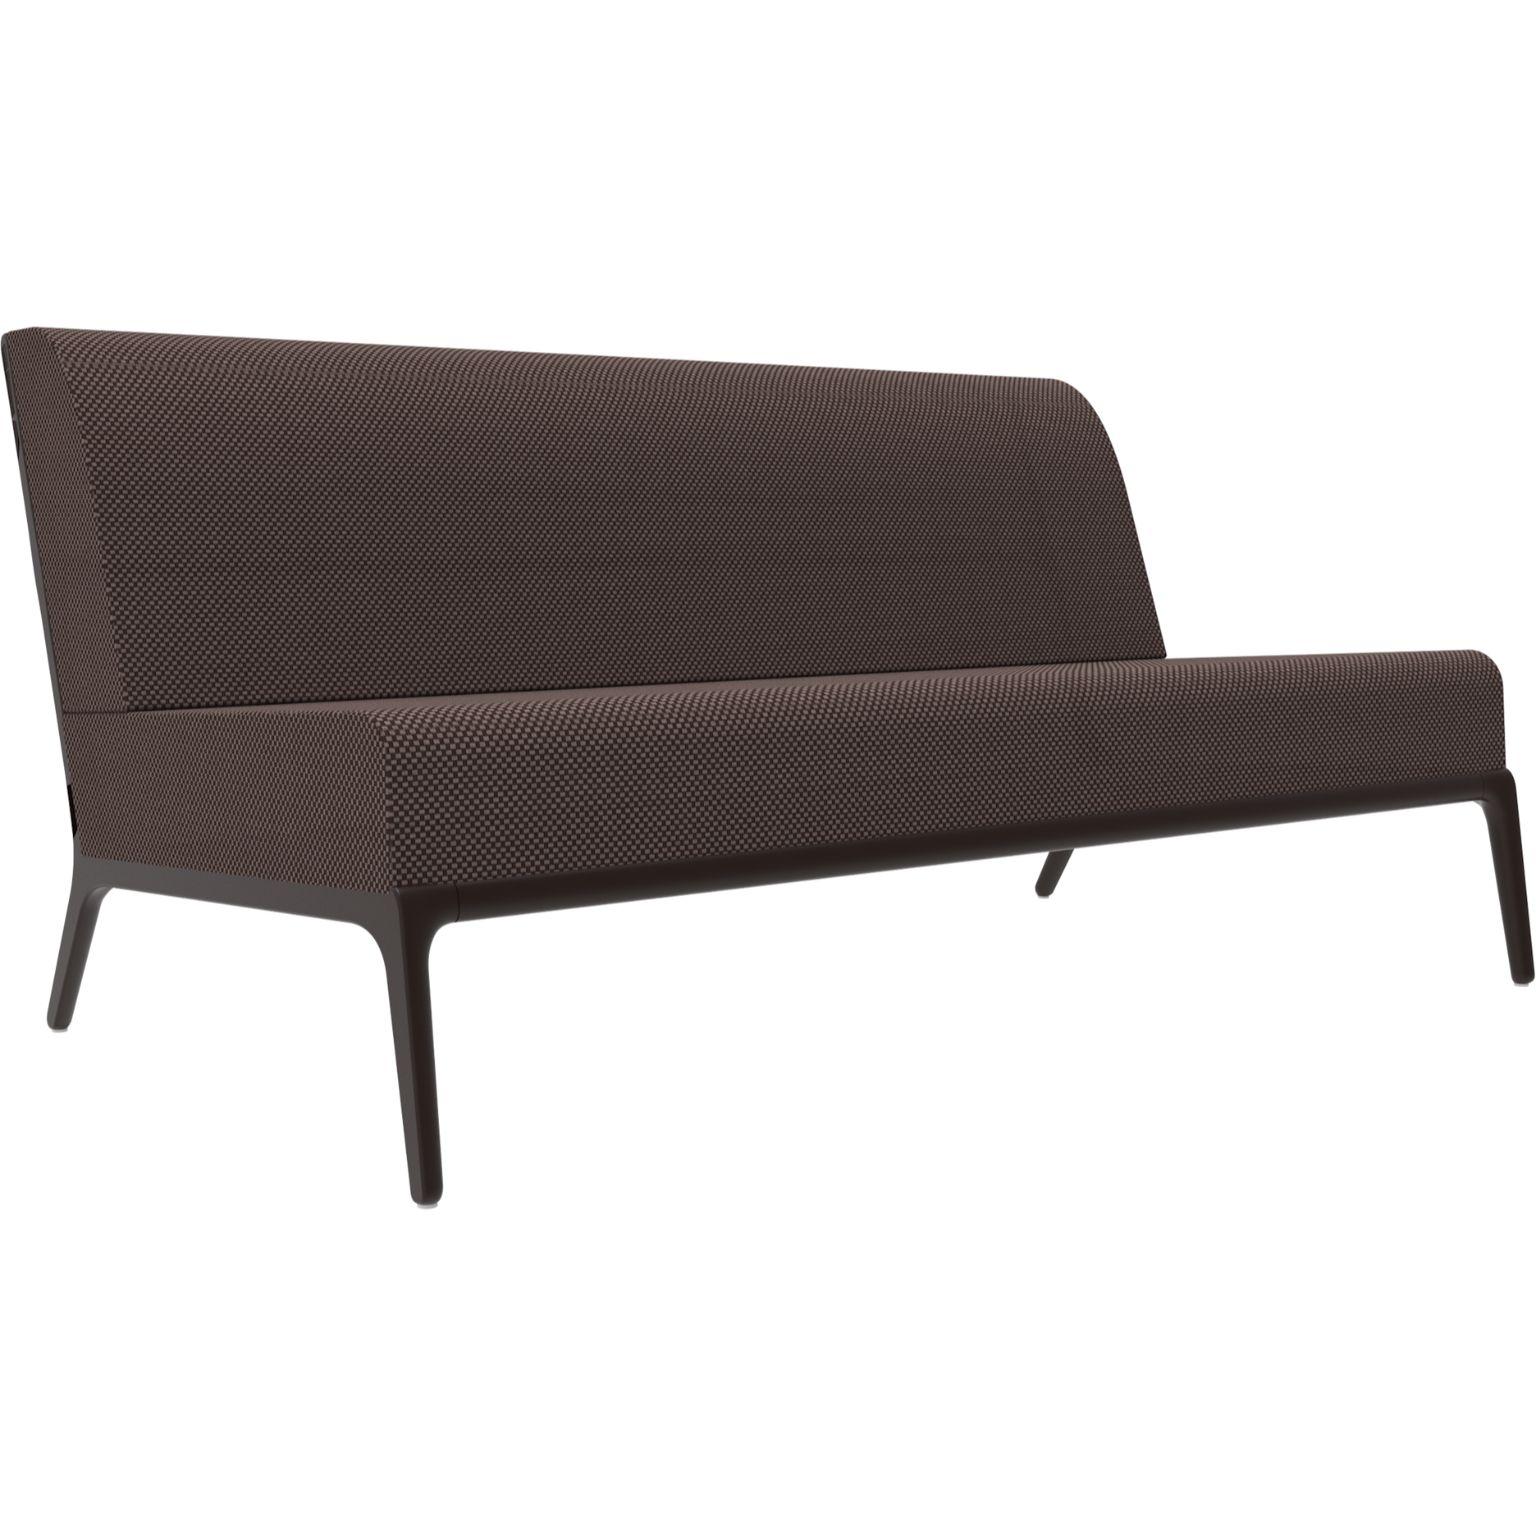 Xaloc Central 160 Chocolate Modular sofa by MOWEE
Dimensions: D100 x W160 x H81 cm (Seat Height 42cm)
Material: Aluminum, Textile
Weight: 35.5 kg
Also Available in different colors and finishes. 

 Xaloc synthesizes the lines of interior